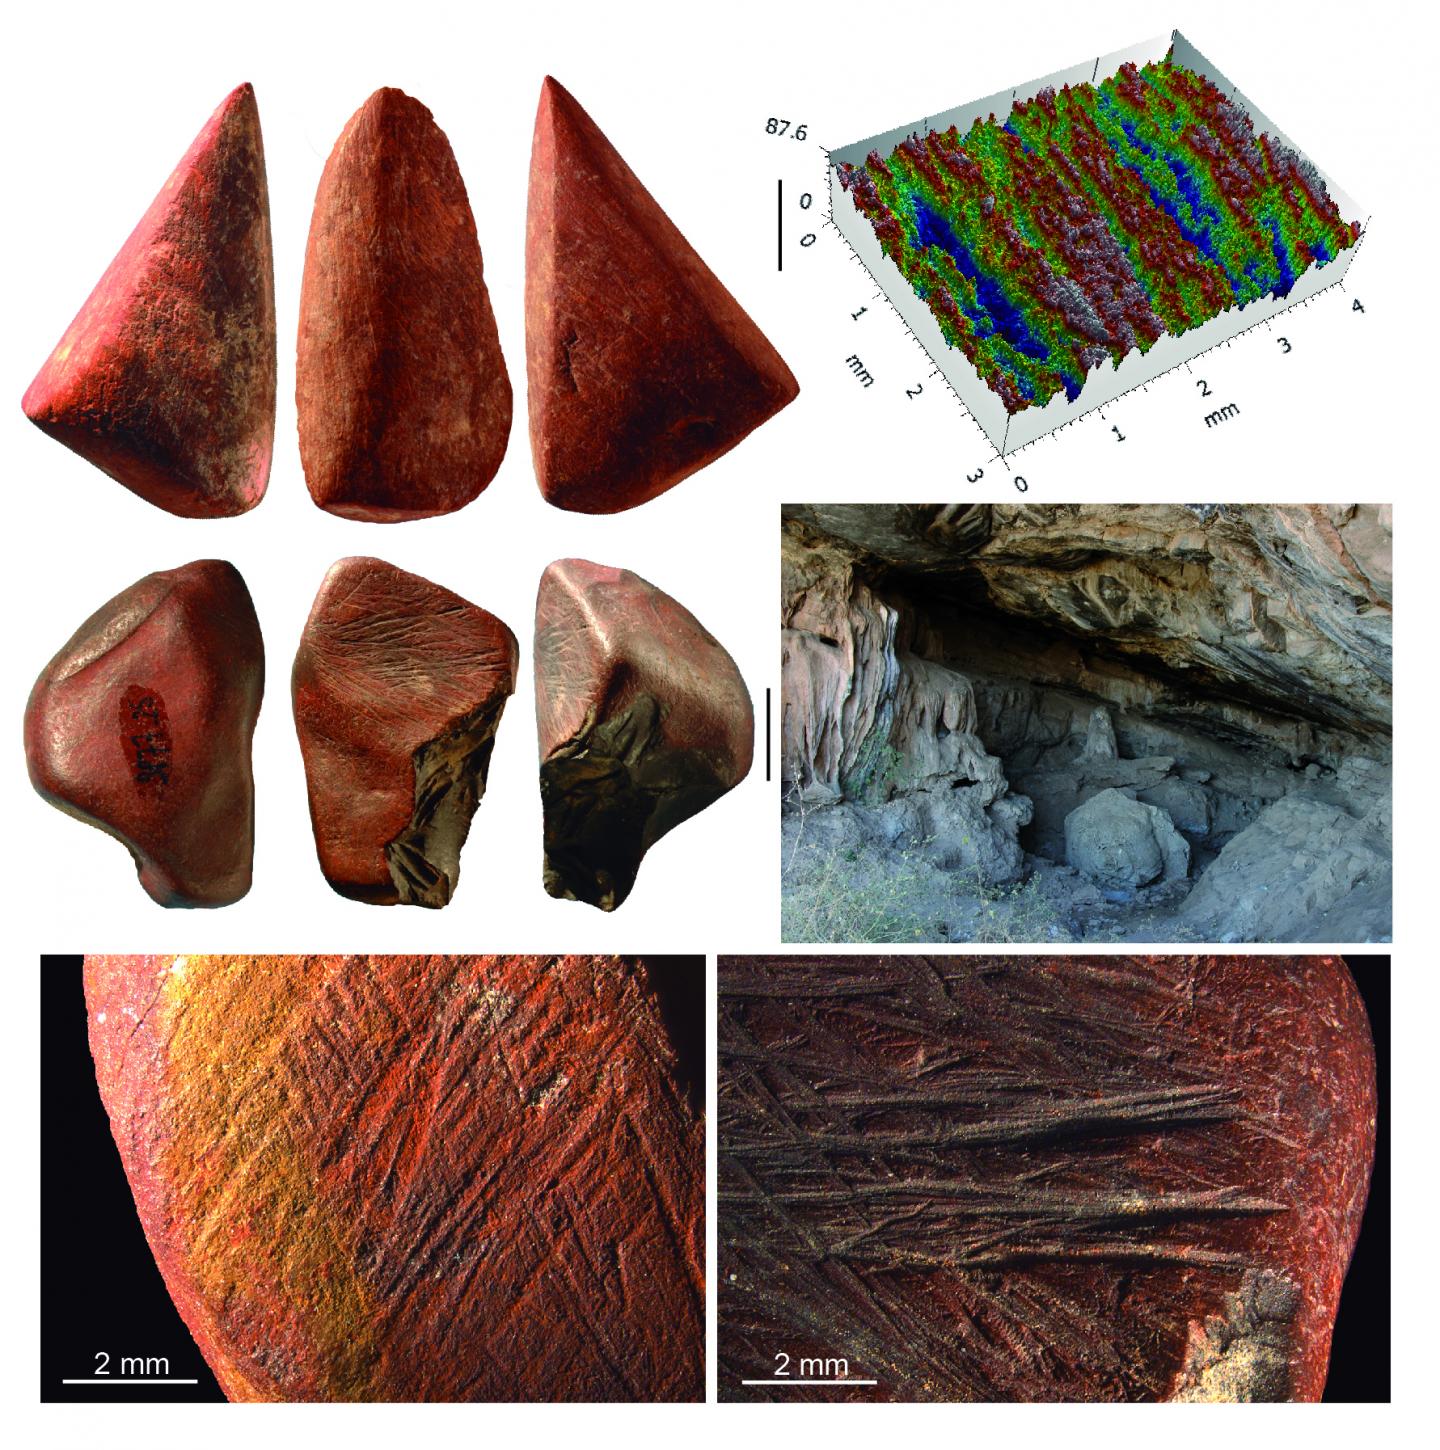 Ochre Use by Middle Stone Age Humans in Porc-Epic Cave Persisted Over Thousands of Years